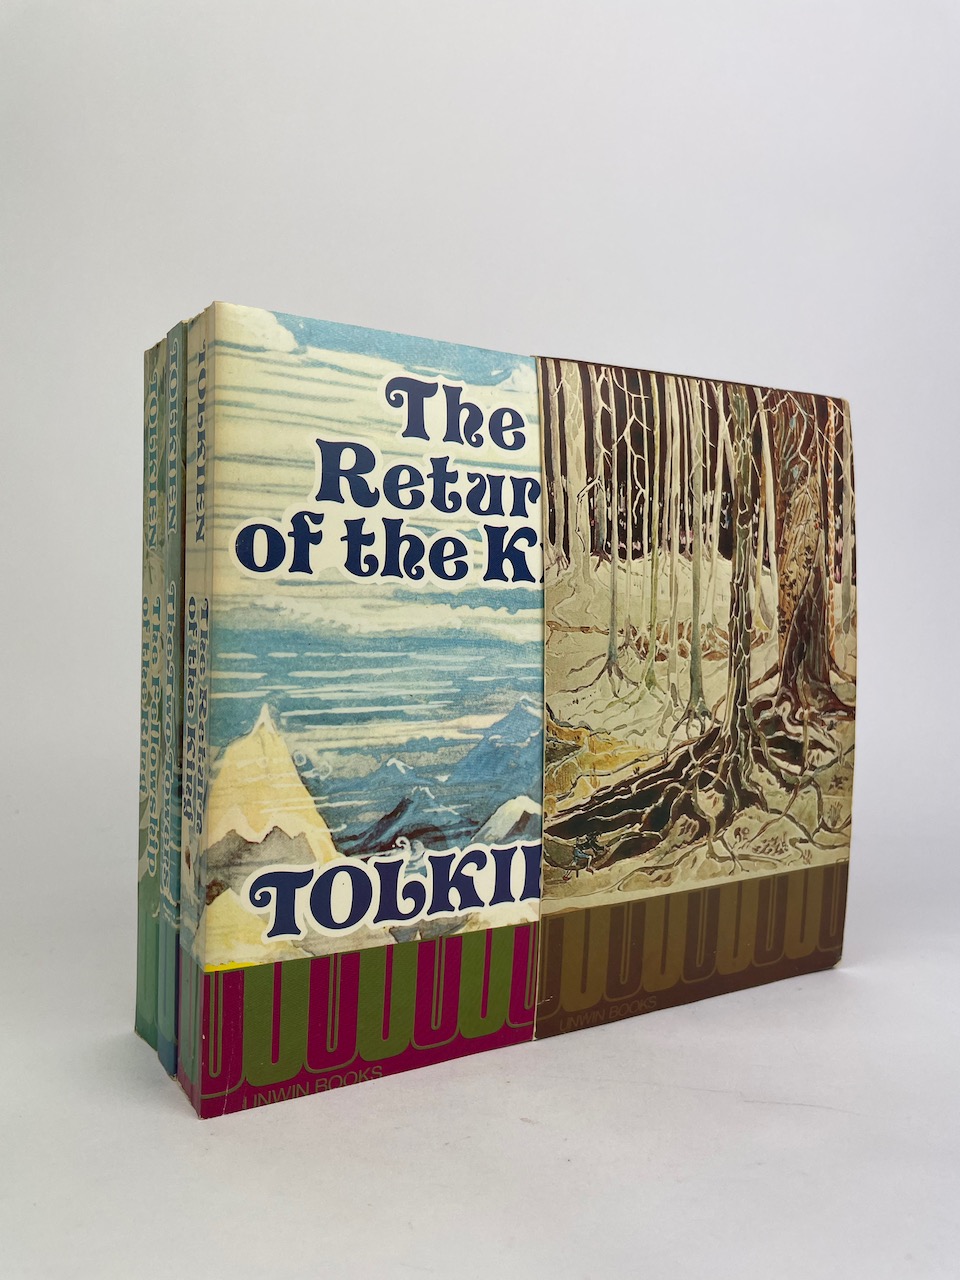 The Lord of the Rings with Tolkien art in sleeve from 1974, by Unwin Books 7